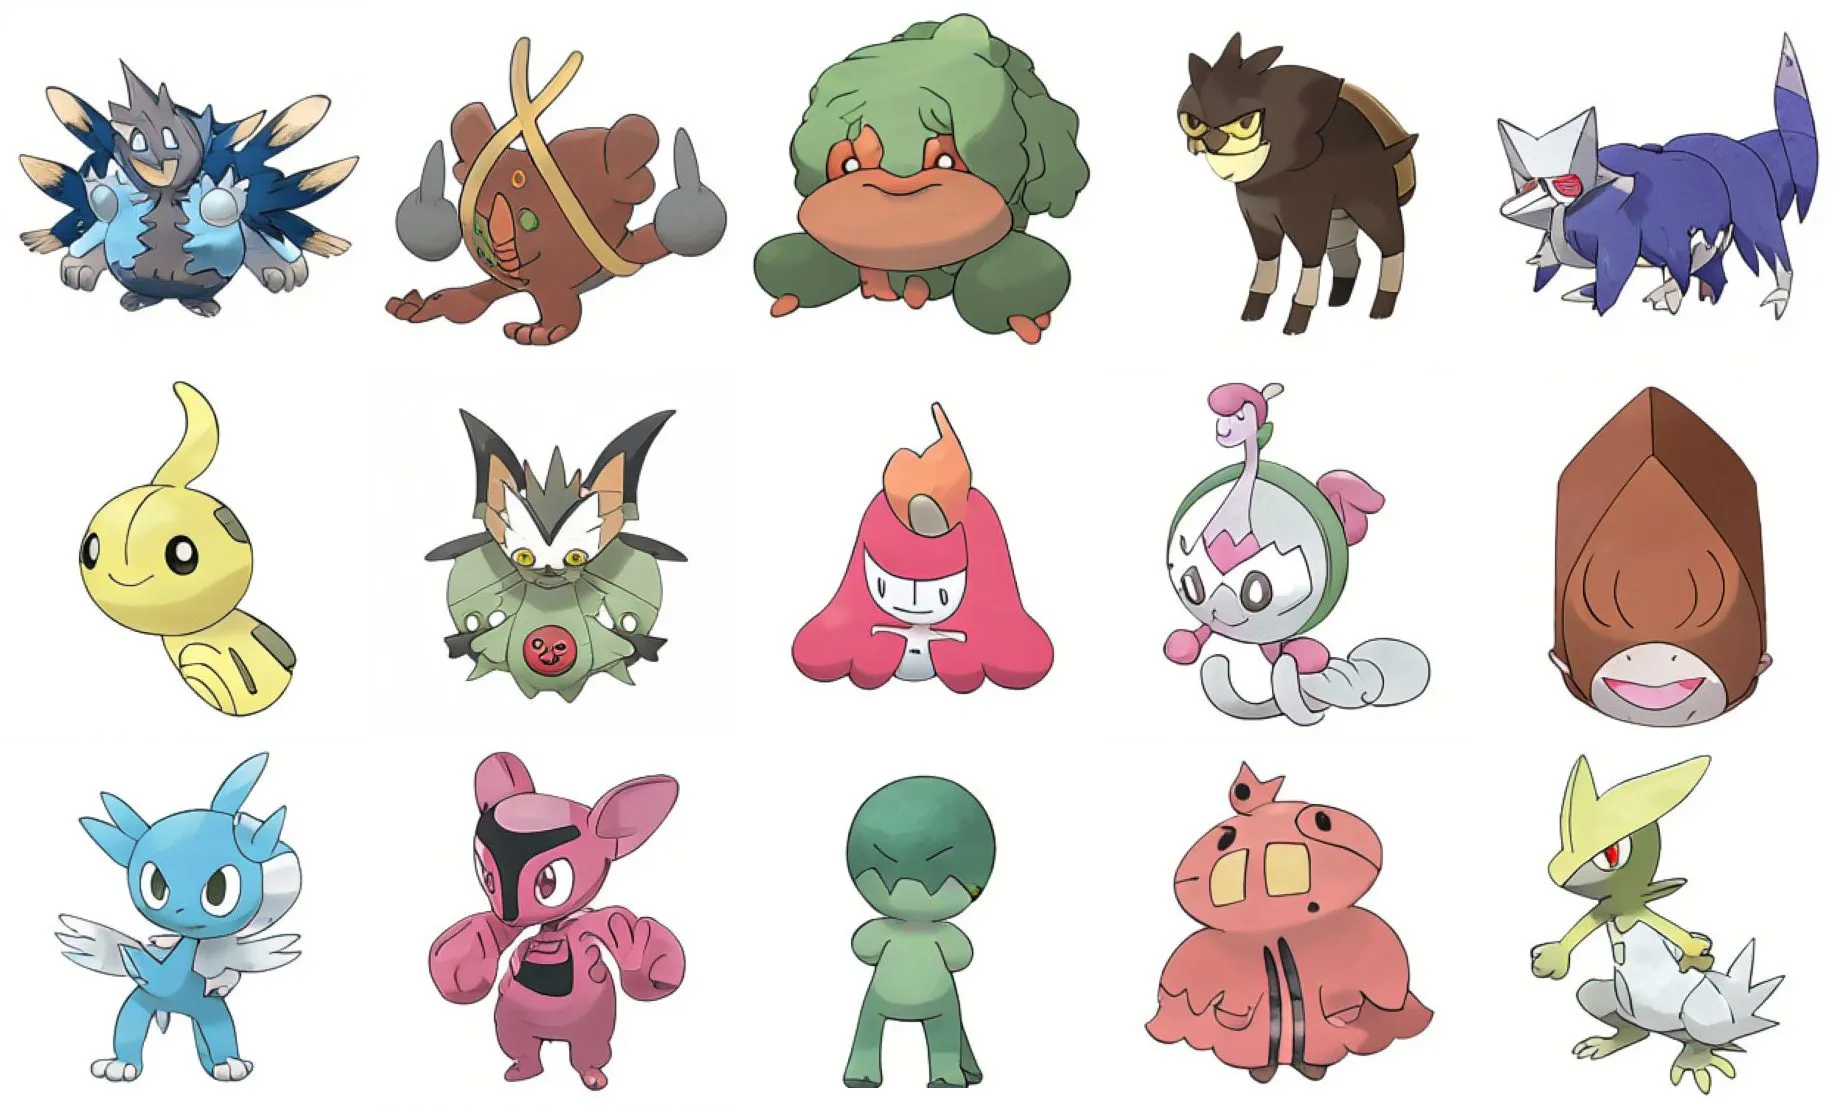 Mostly make digital art , mostly pokemons and fakemons by Thehomelessone